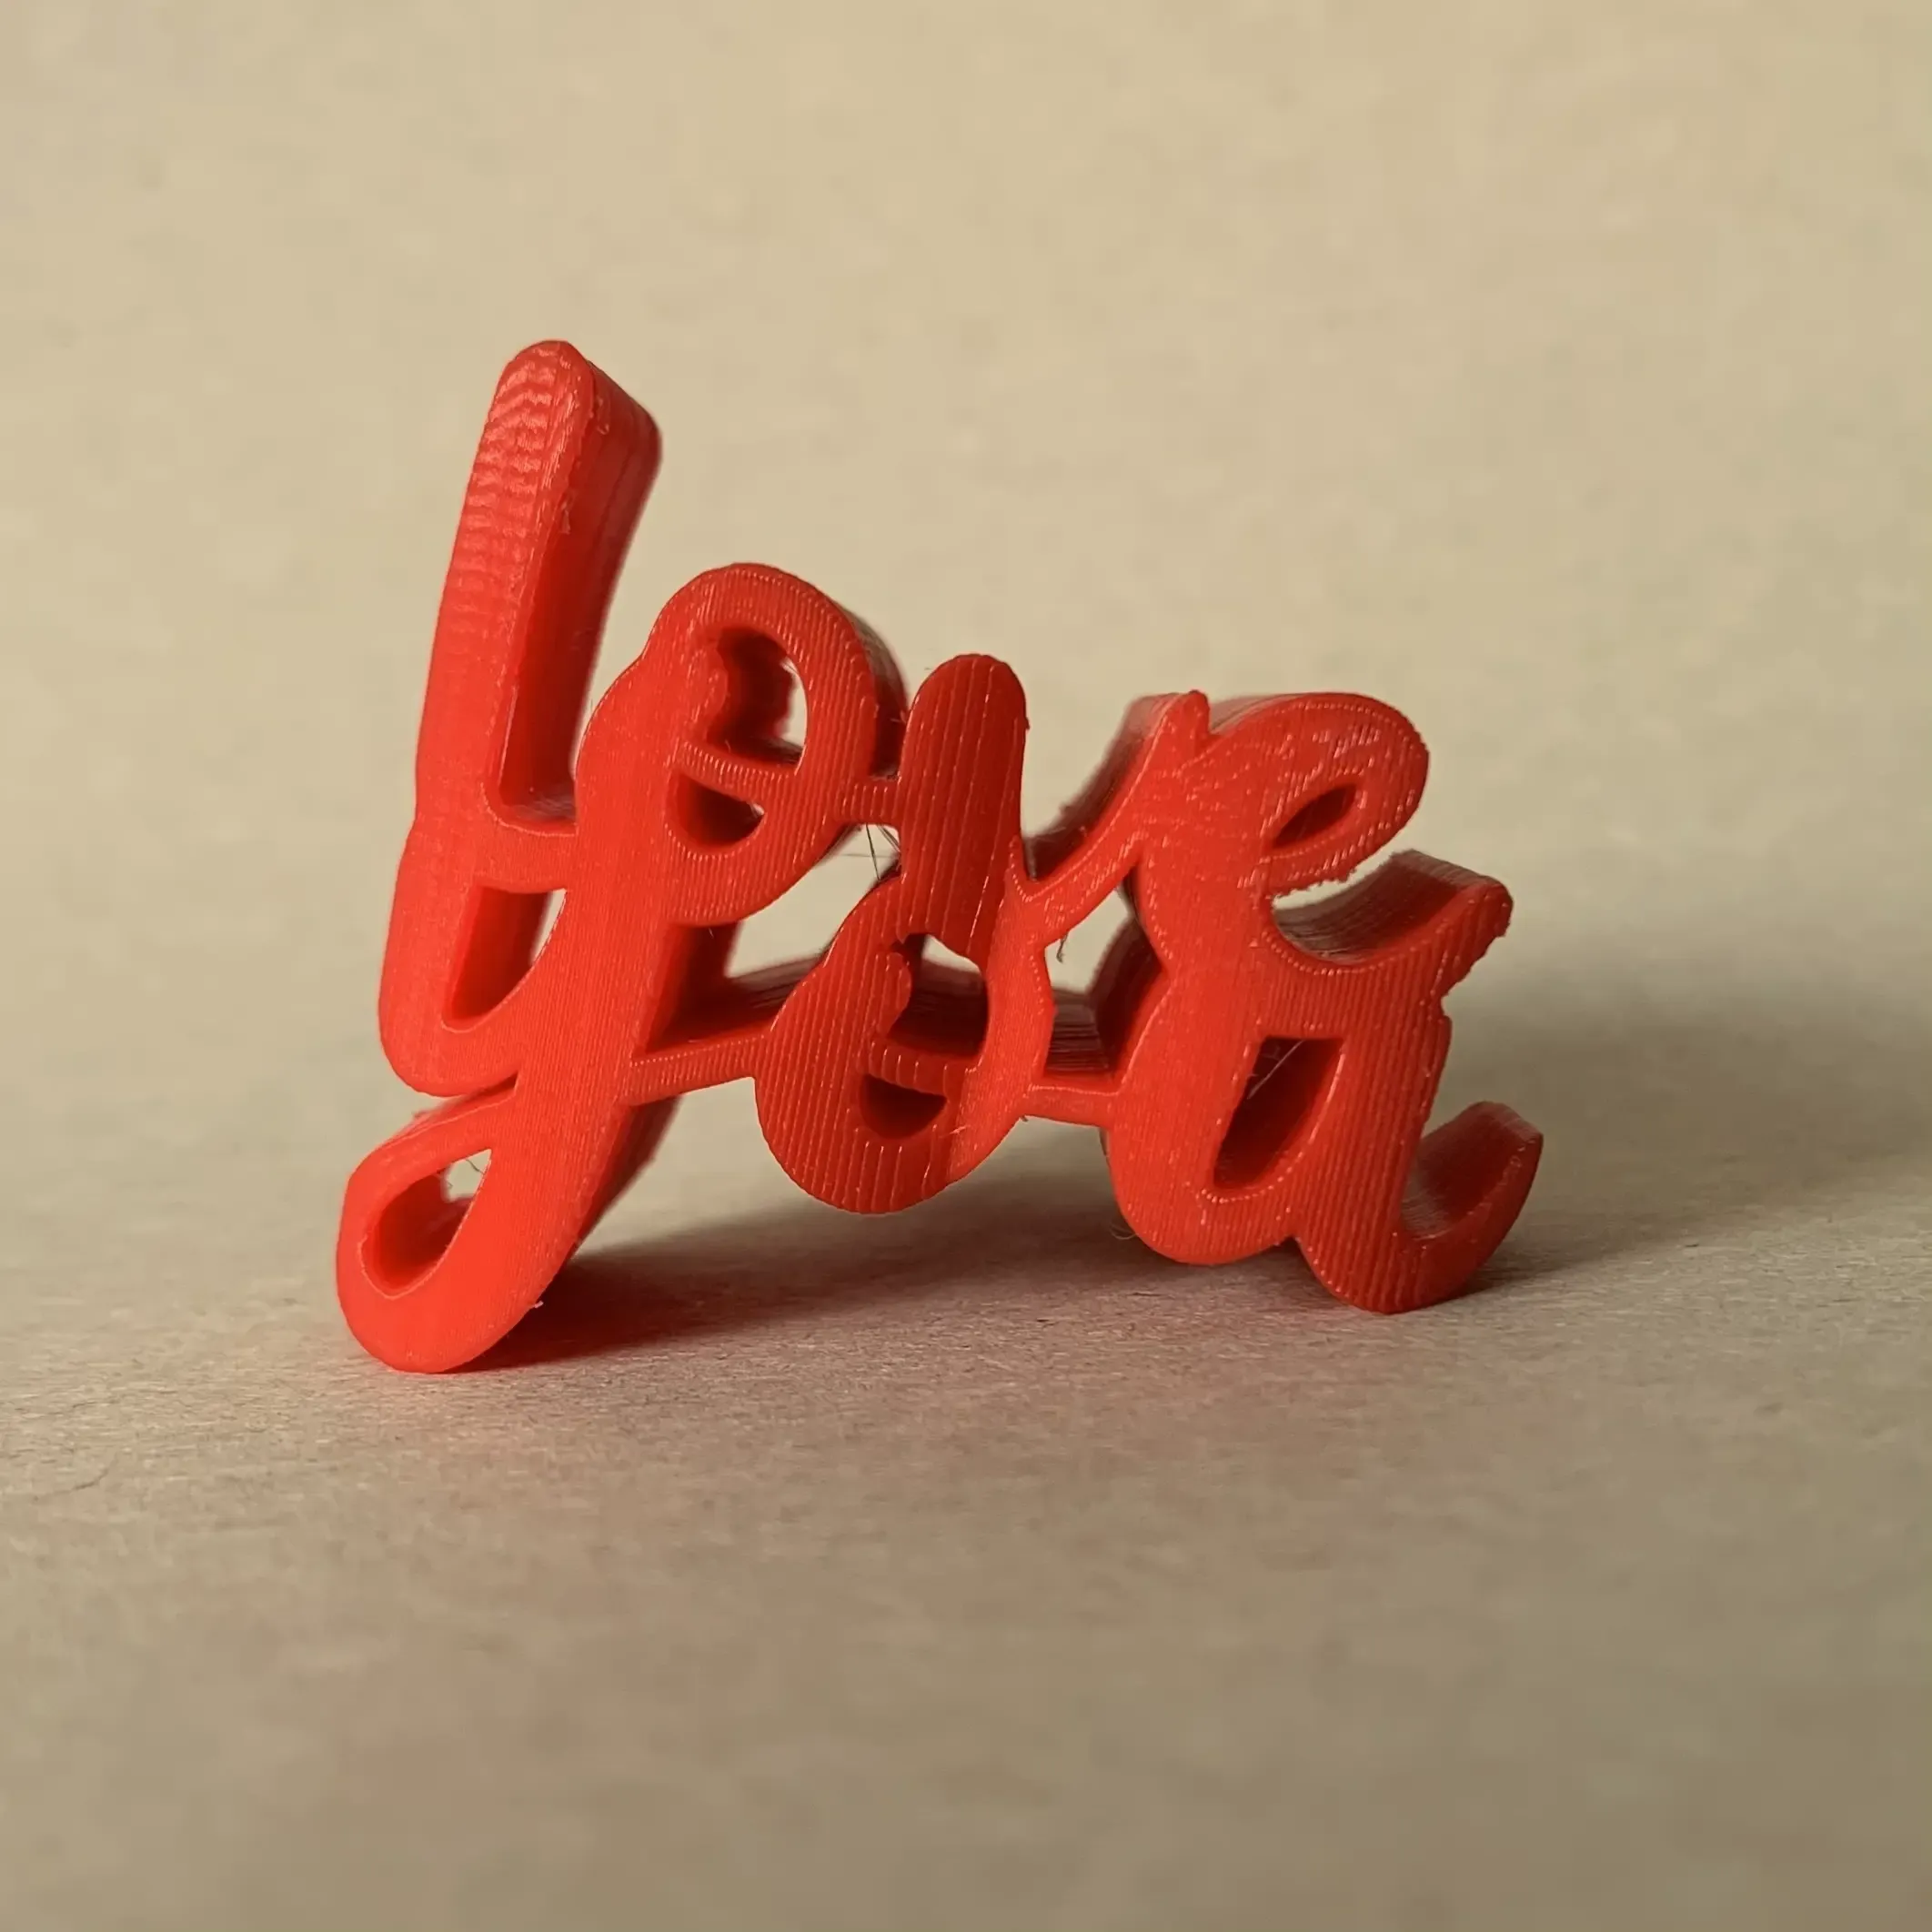 LOVE YOU - HEART TEXT FLIP VALENTINE'S DAY GIFT